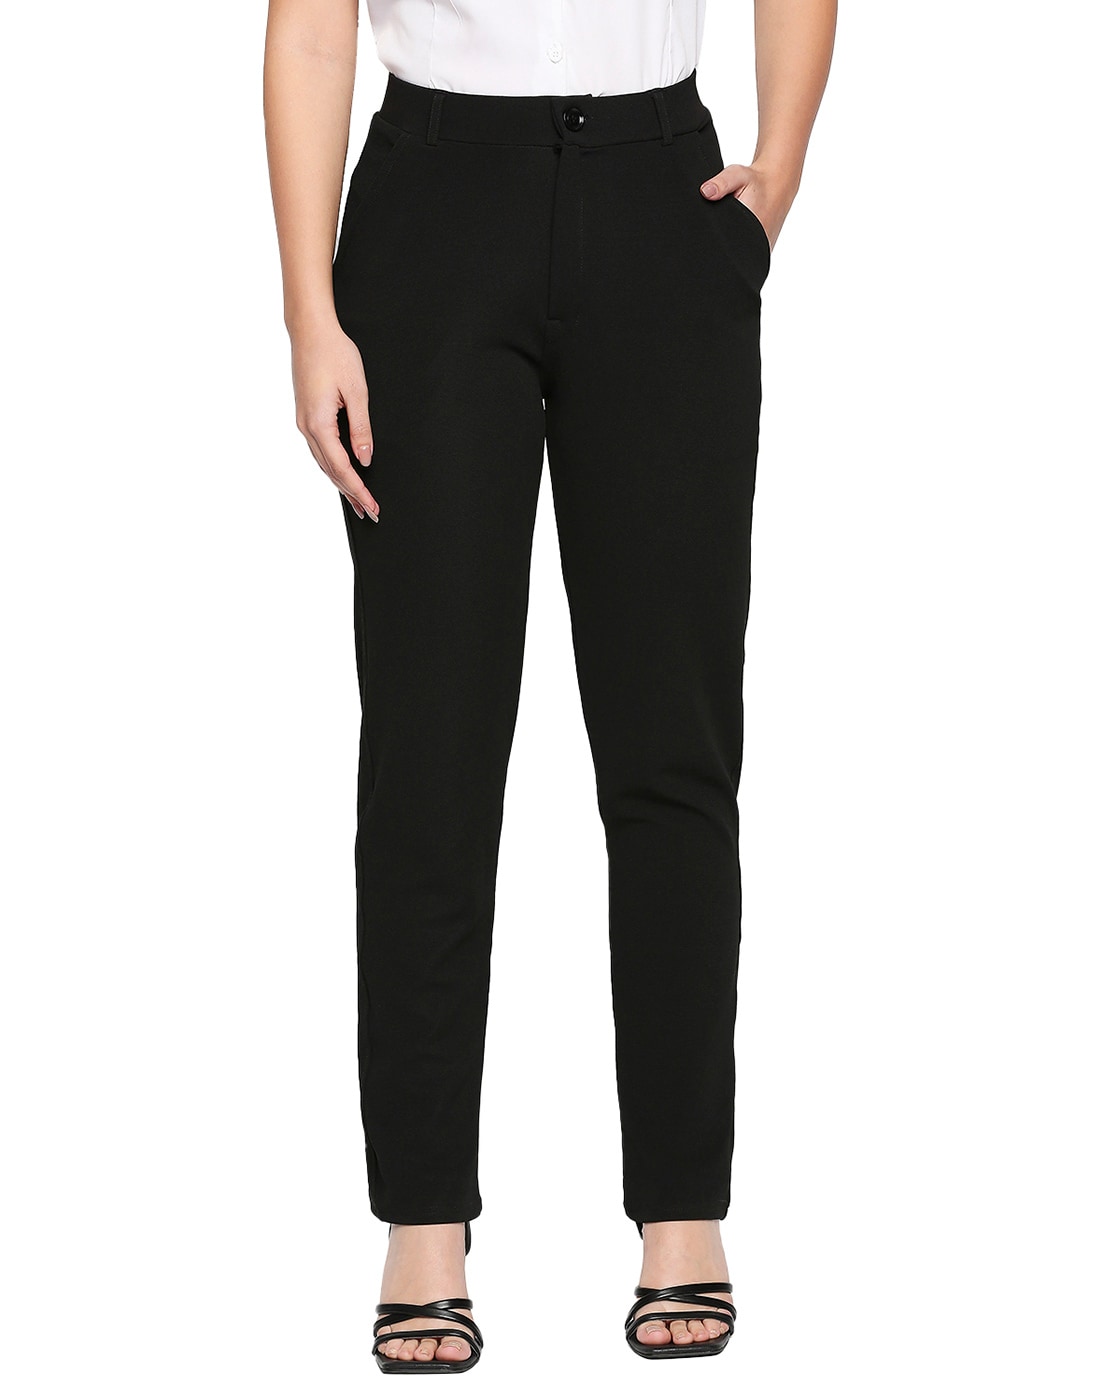 Cotton Black Ladies Formal Pants at Rs 325/piece in New Delhi | ID:  20271033048